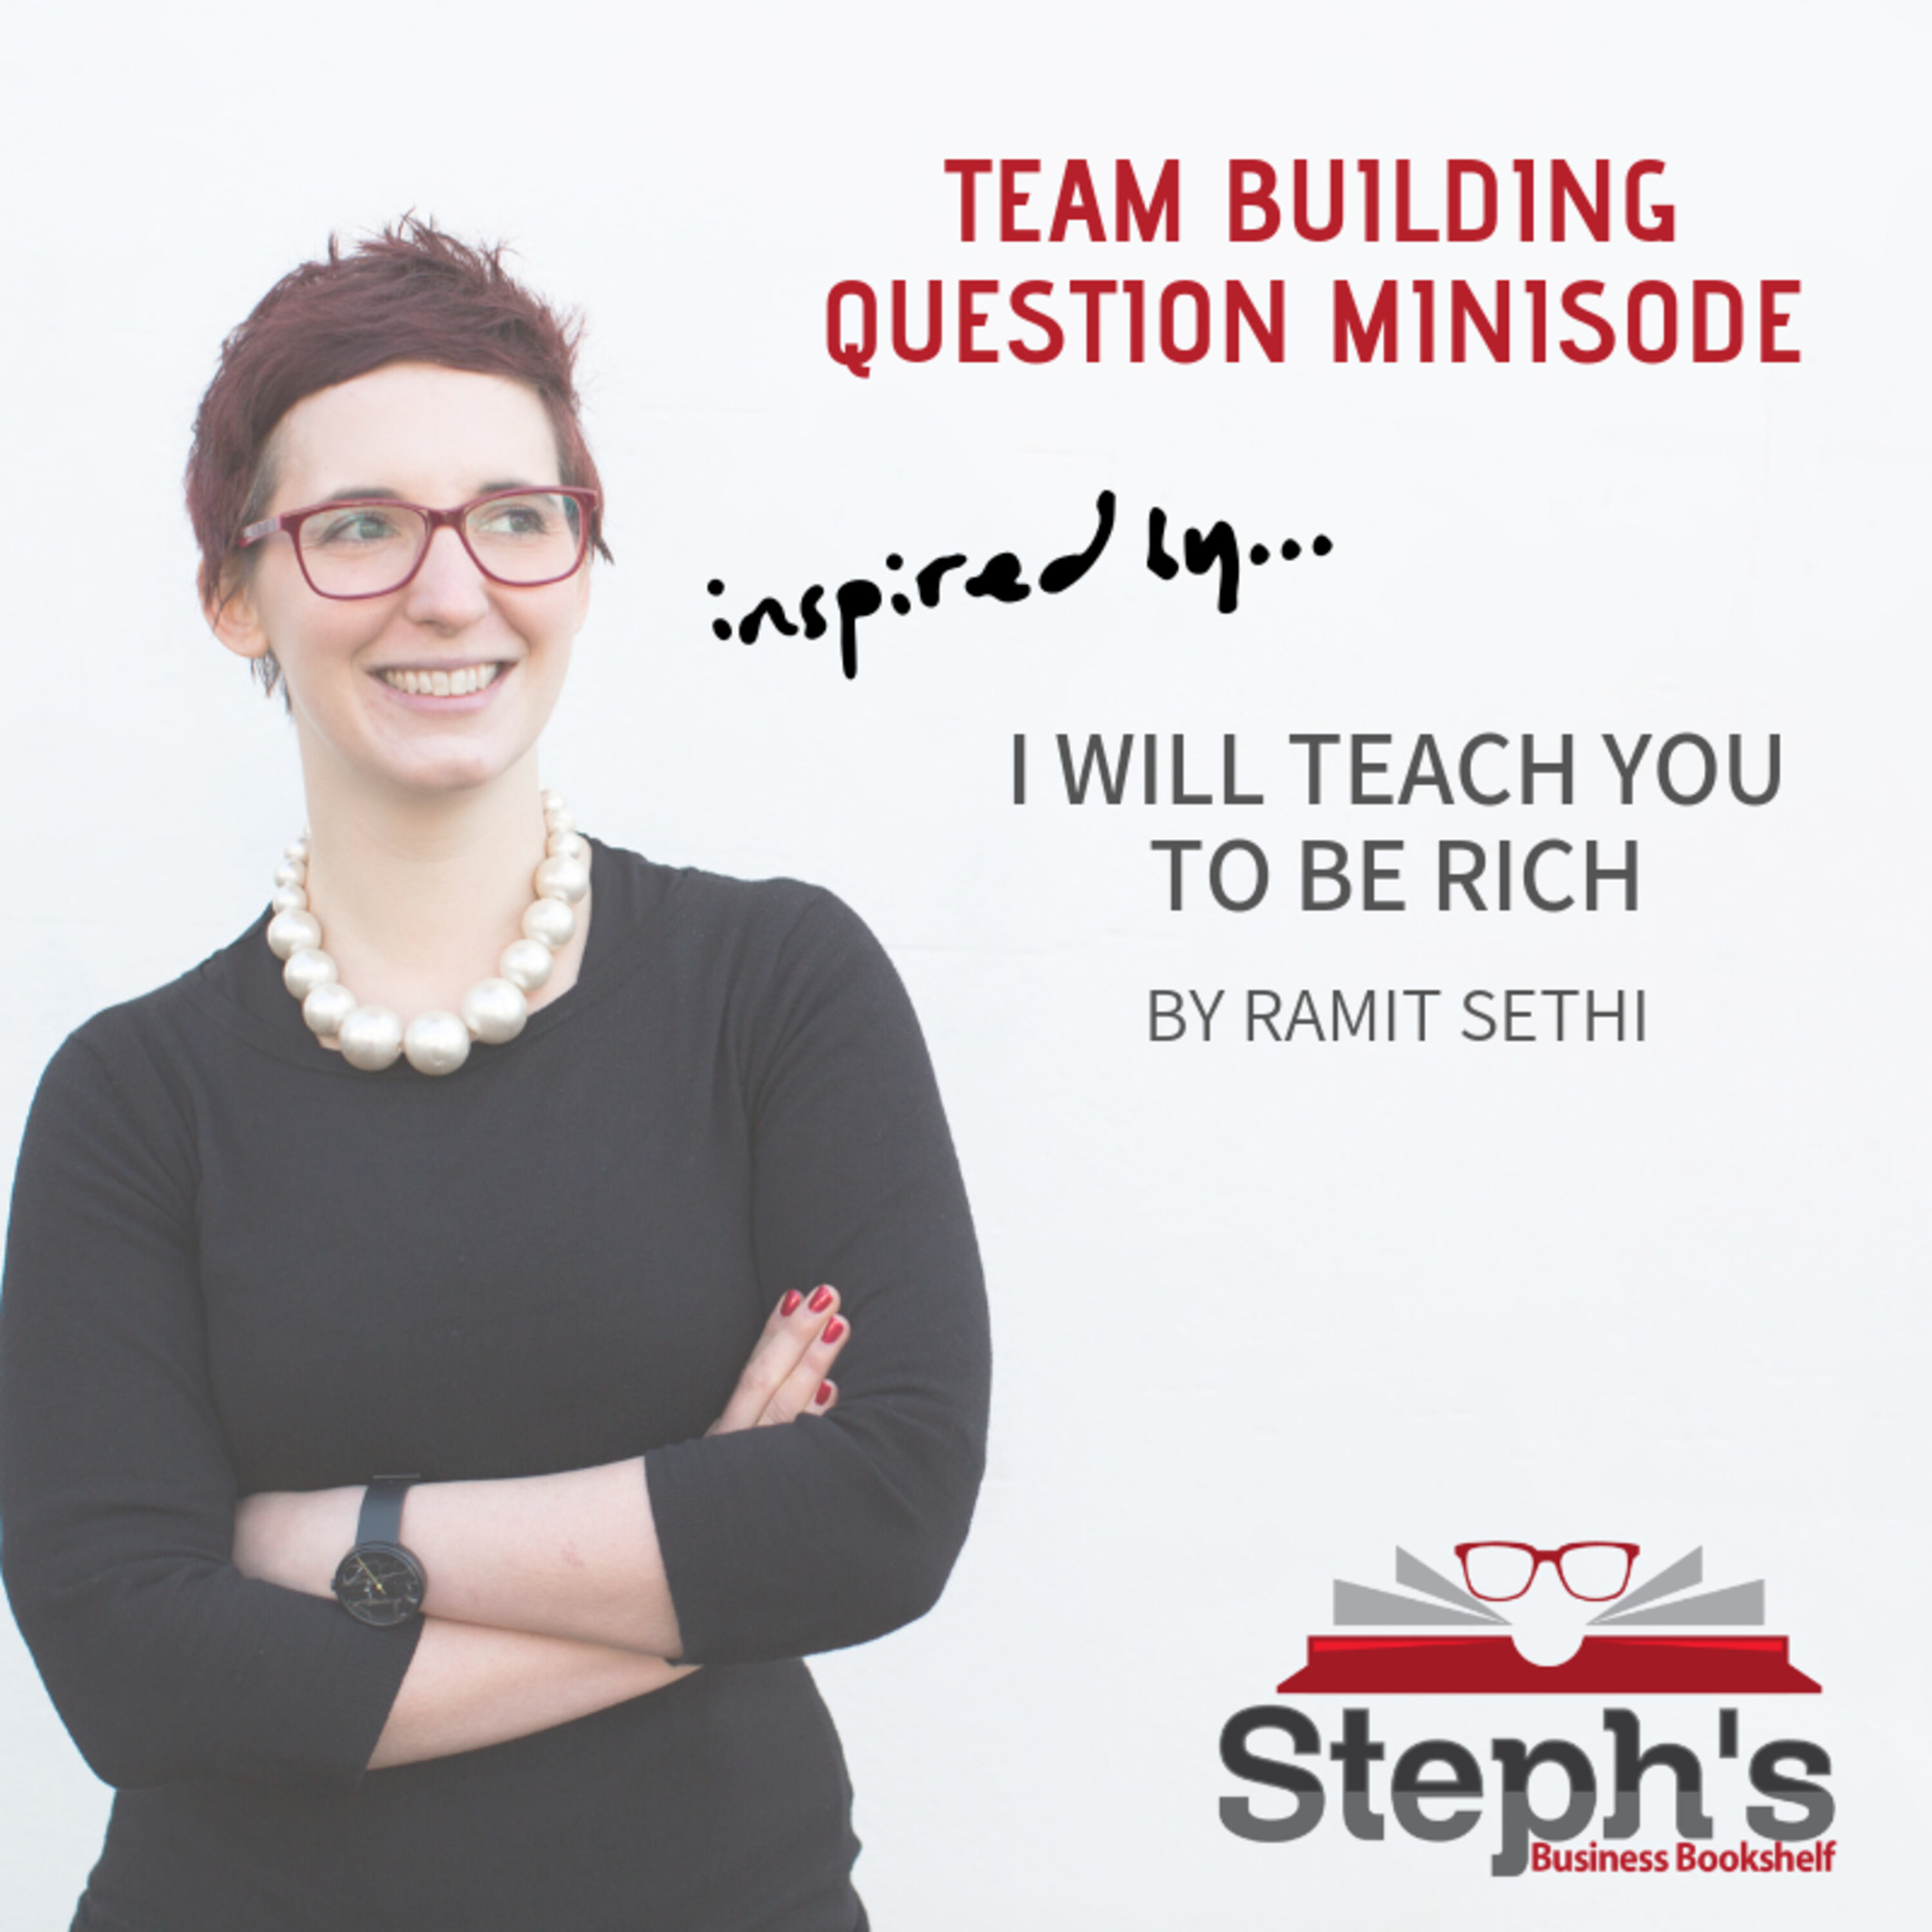 I Will Teach You To Be Rich: Team Building Question Image